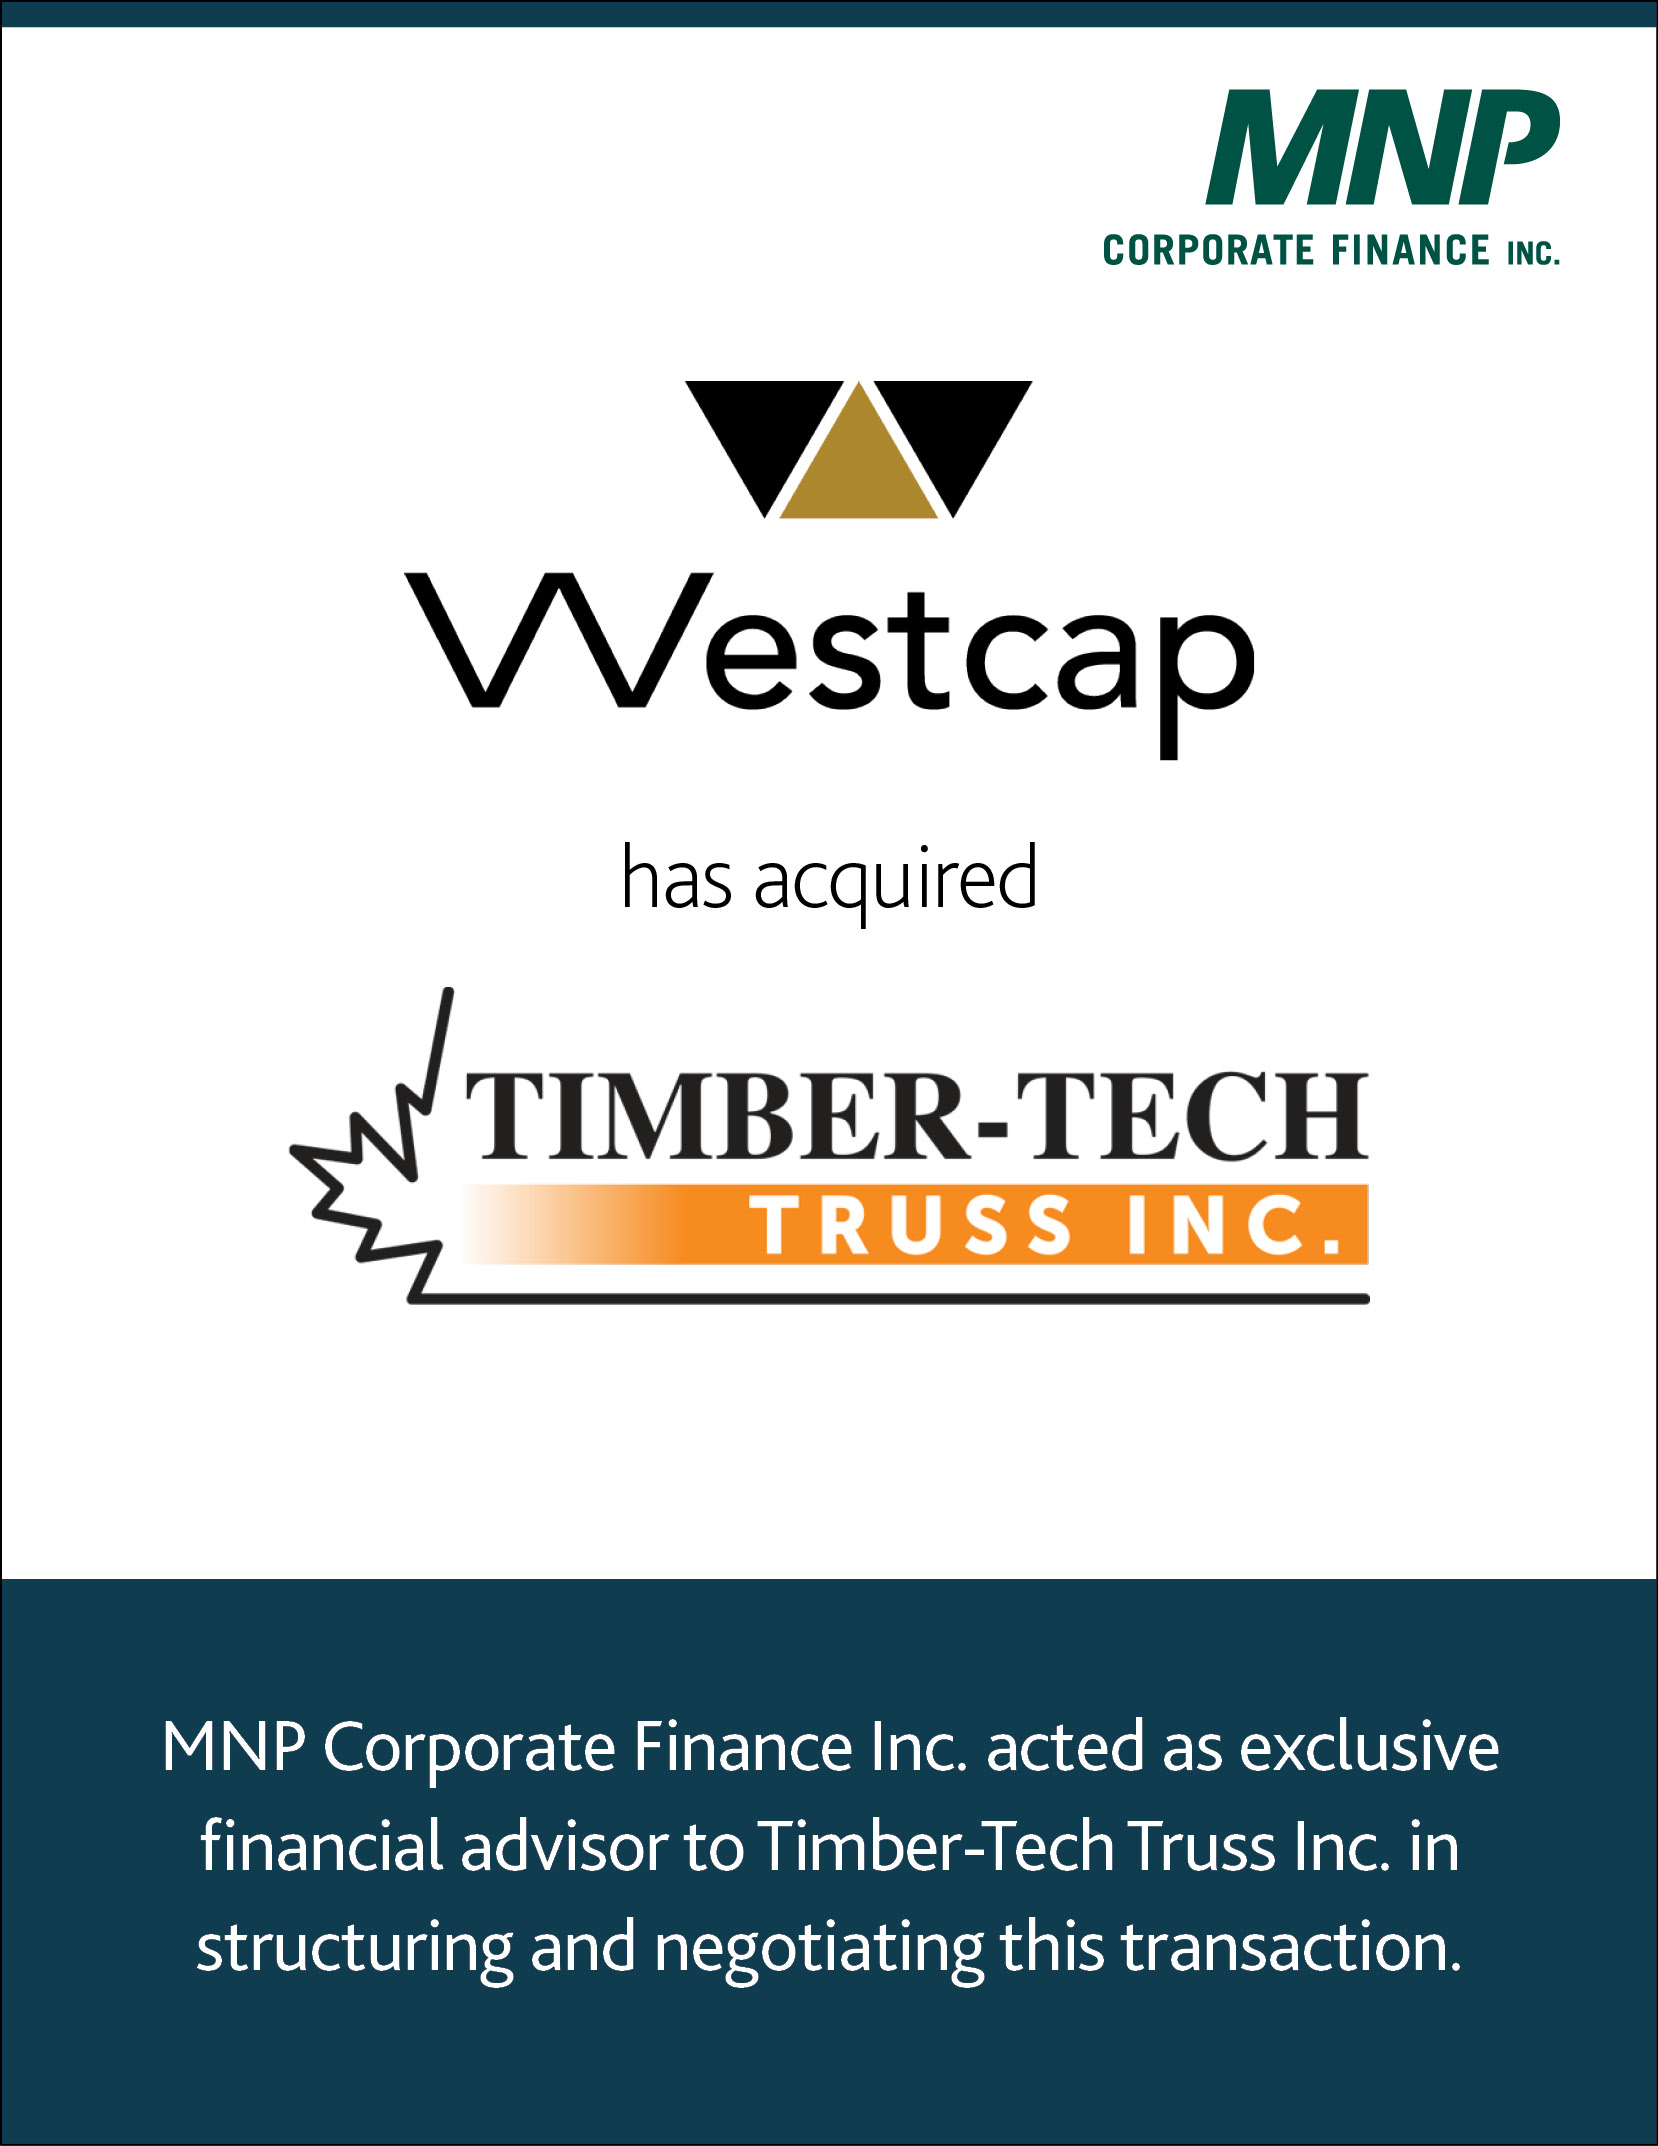 Westcap acquires Timbertech Trust Inc." - A logo of Westcap, a financial company, with the text "Timbertech Trust Inc." underneath.